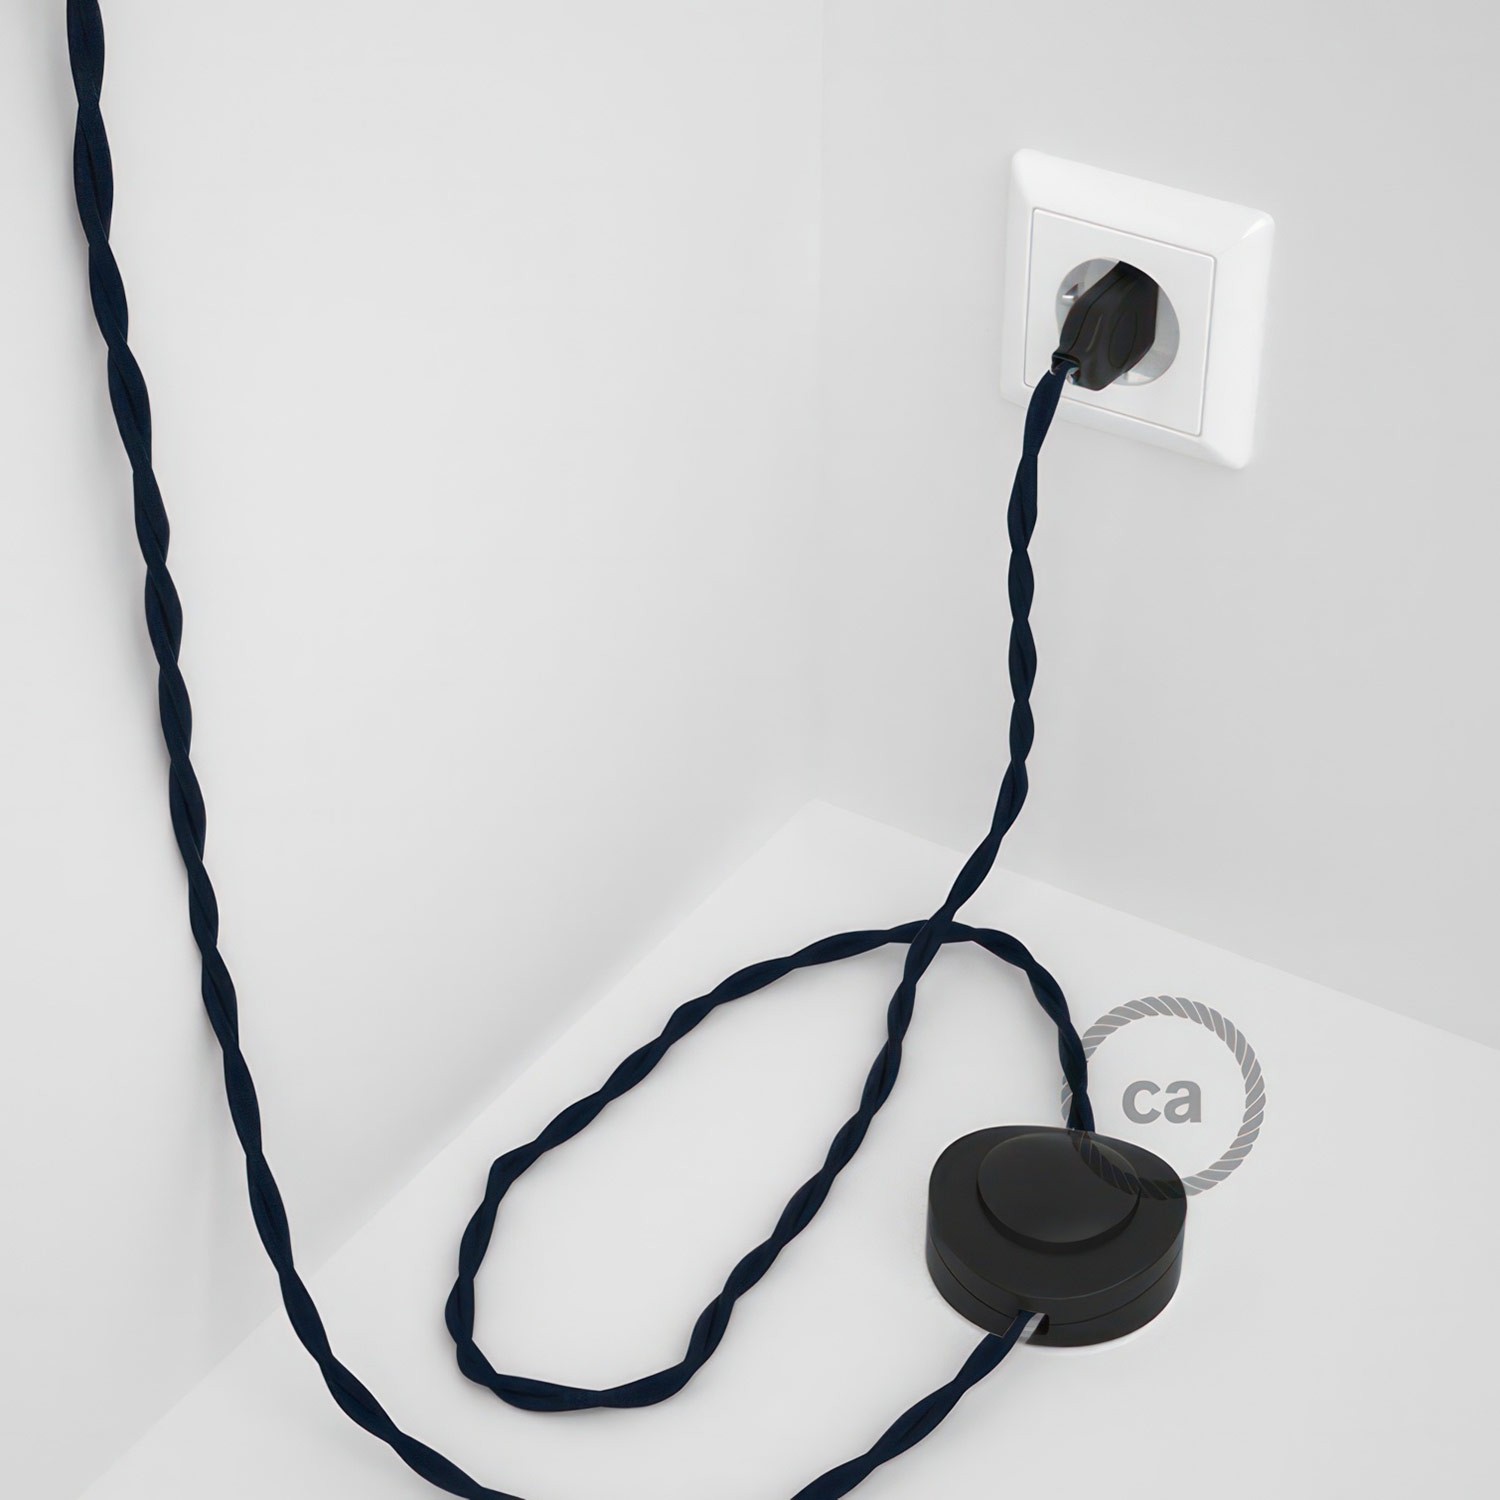 Wiring Pedestal, TM20 Dark Blue Rayon 3 m. Choose the colour of the switch and plug.